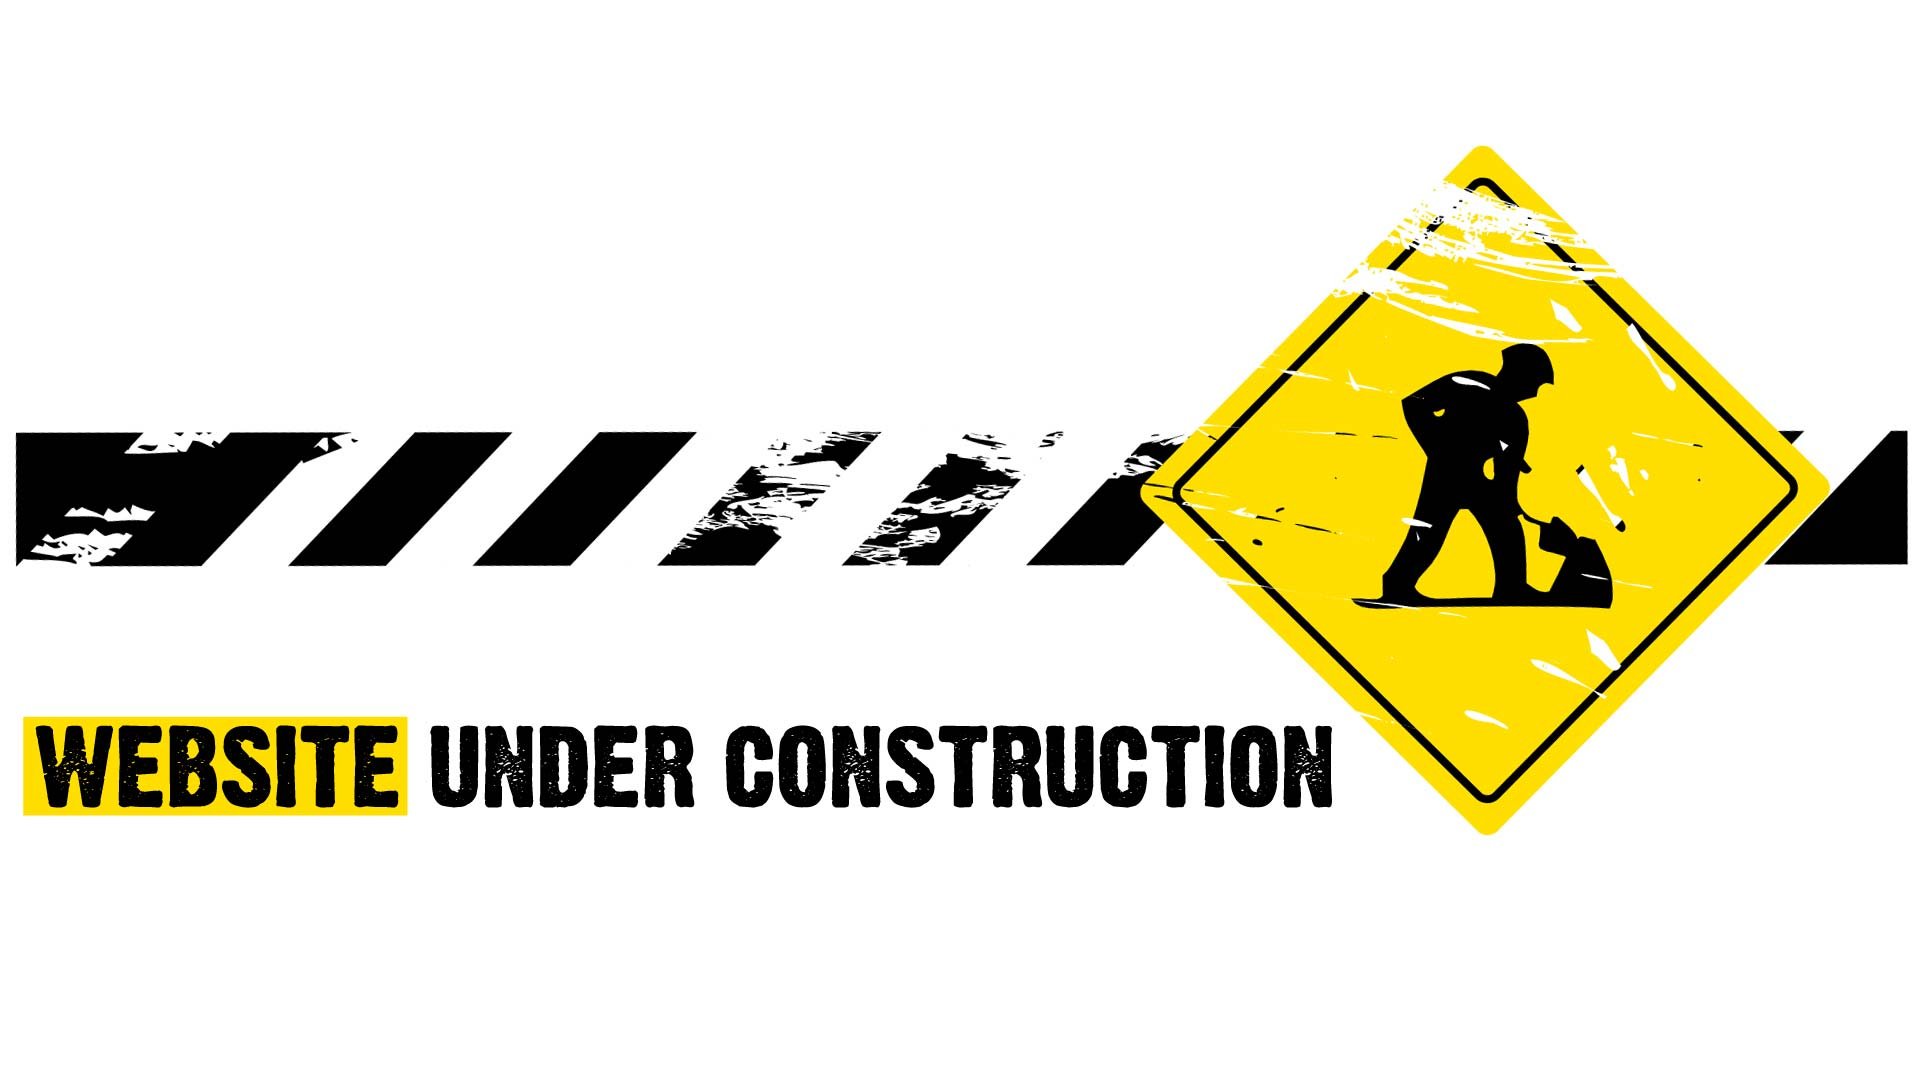 Under Construction Sign Work Puter Humor Funny Text Maintenance